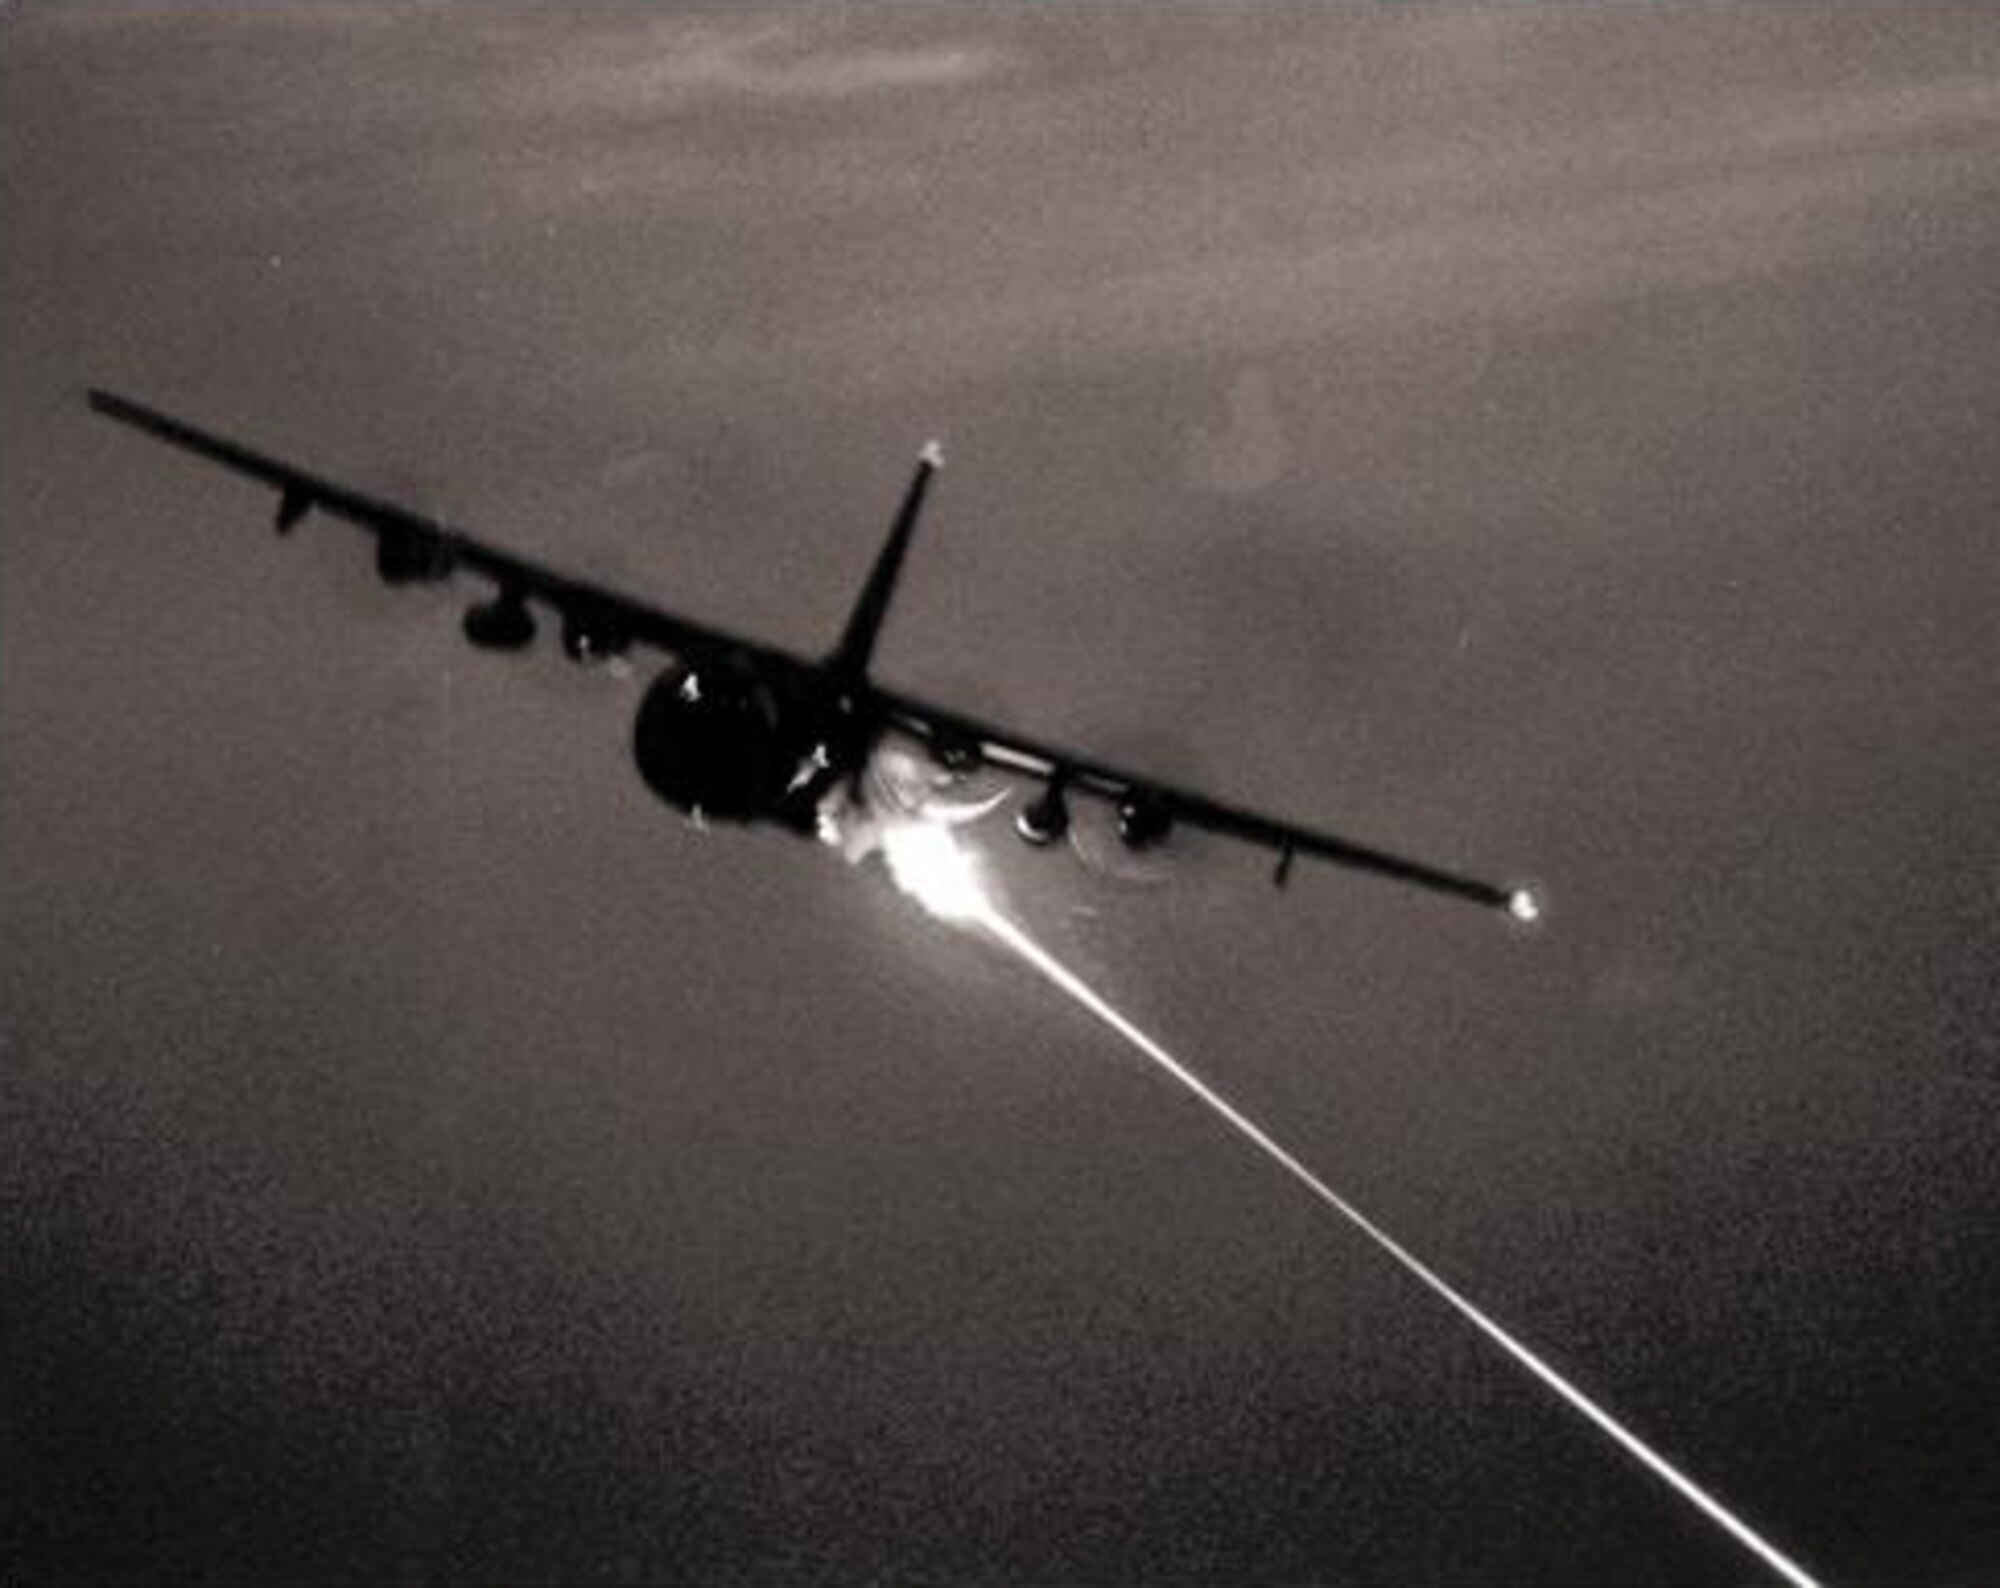 As part of an effort to produce a functional spotting charge for Air Force Special Operations Command training purposes, AFRL turned to leftover World War II inventories, modifying the armor piercing rounds—here being fired from an AC-130 gunship—remaining from that era.